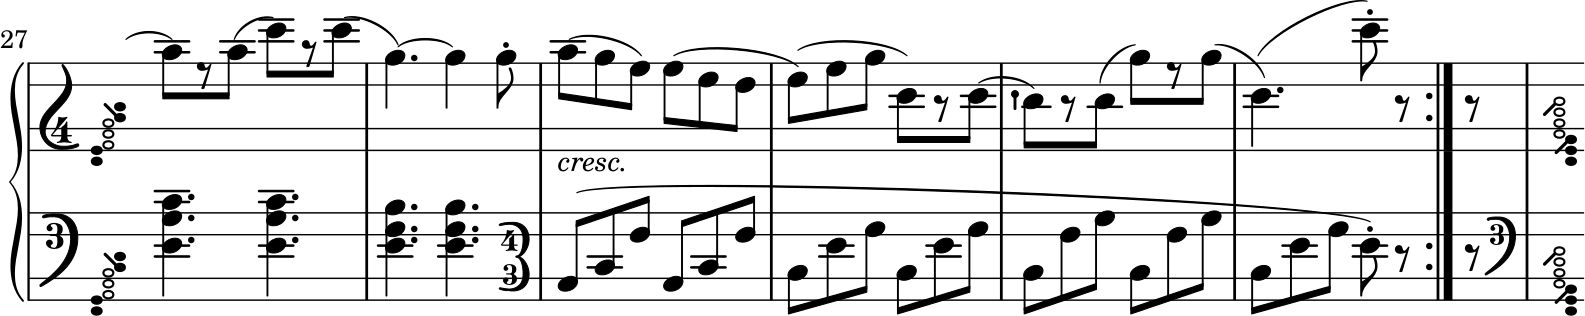 Tarantella measures 27-32 with alto clef in left hand part